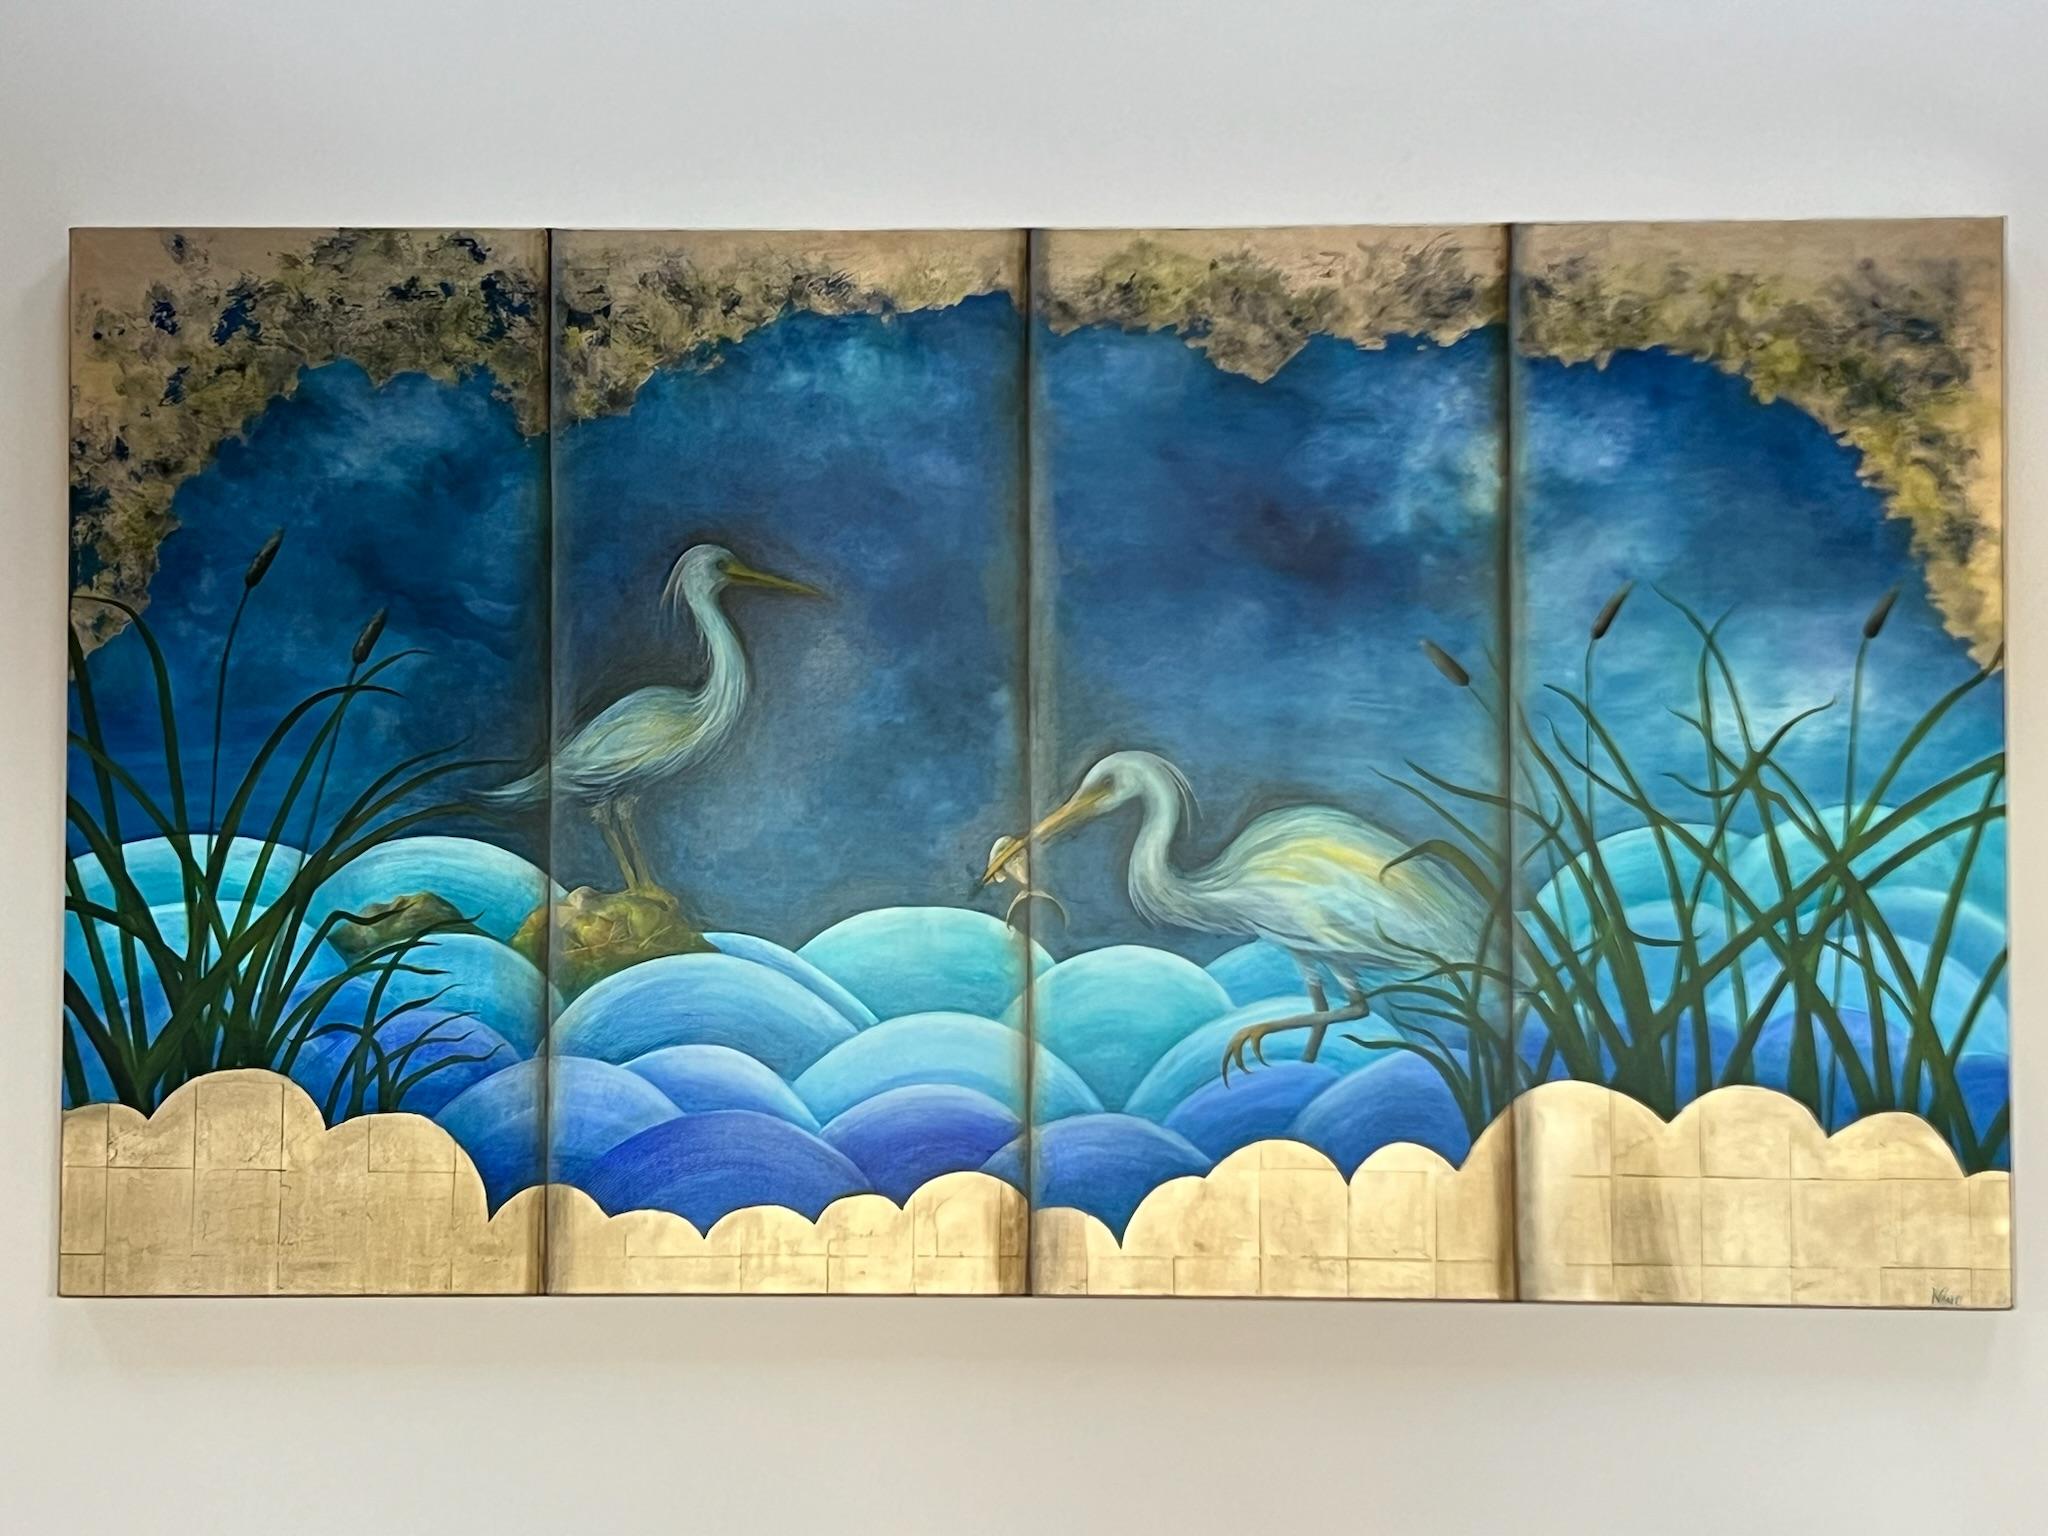 Chinoiserie Egrets, Animal painting, Birds, Art deco - Art Deco Painting by Nonie Clayton Bennett